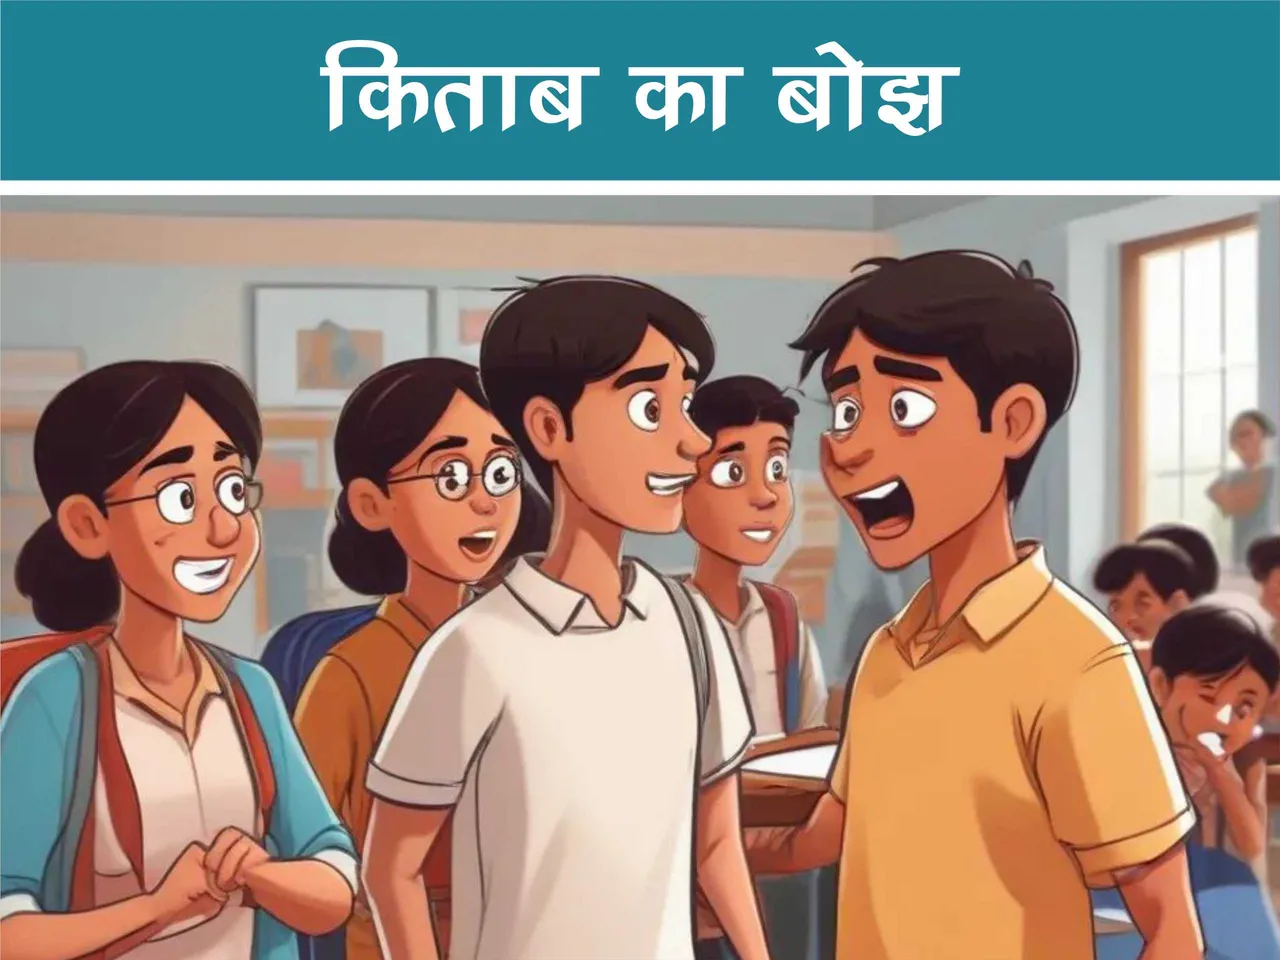 Students in class cartoon image